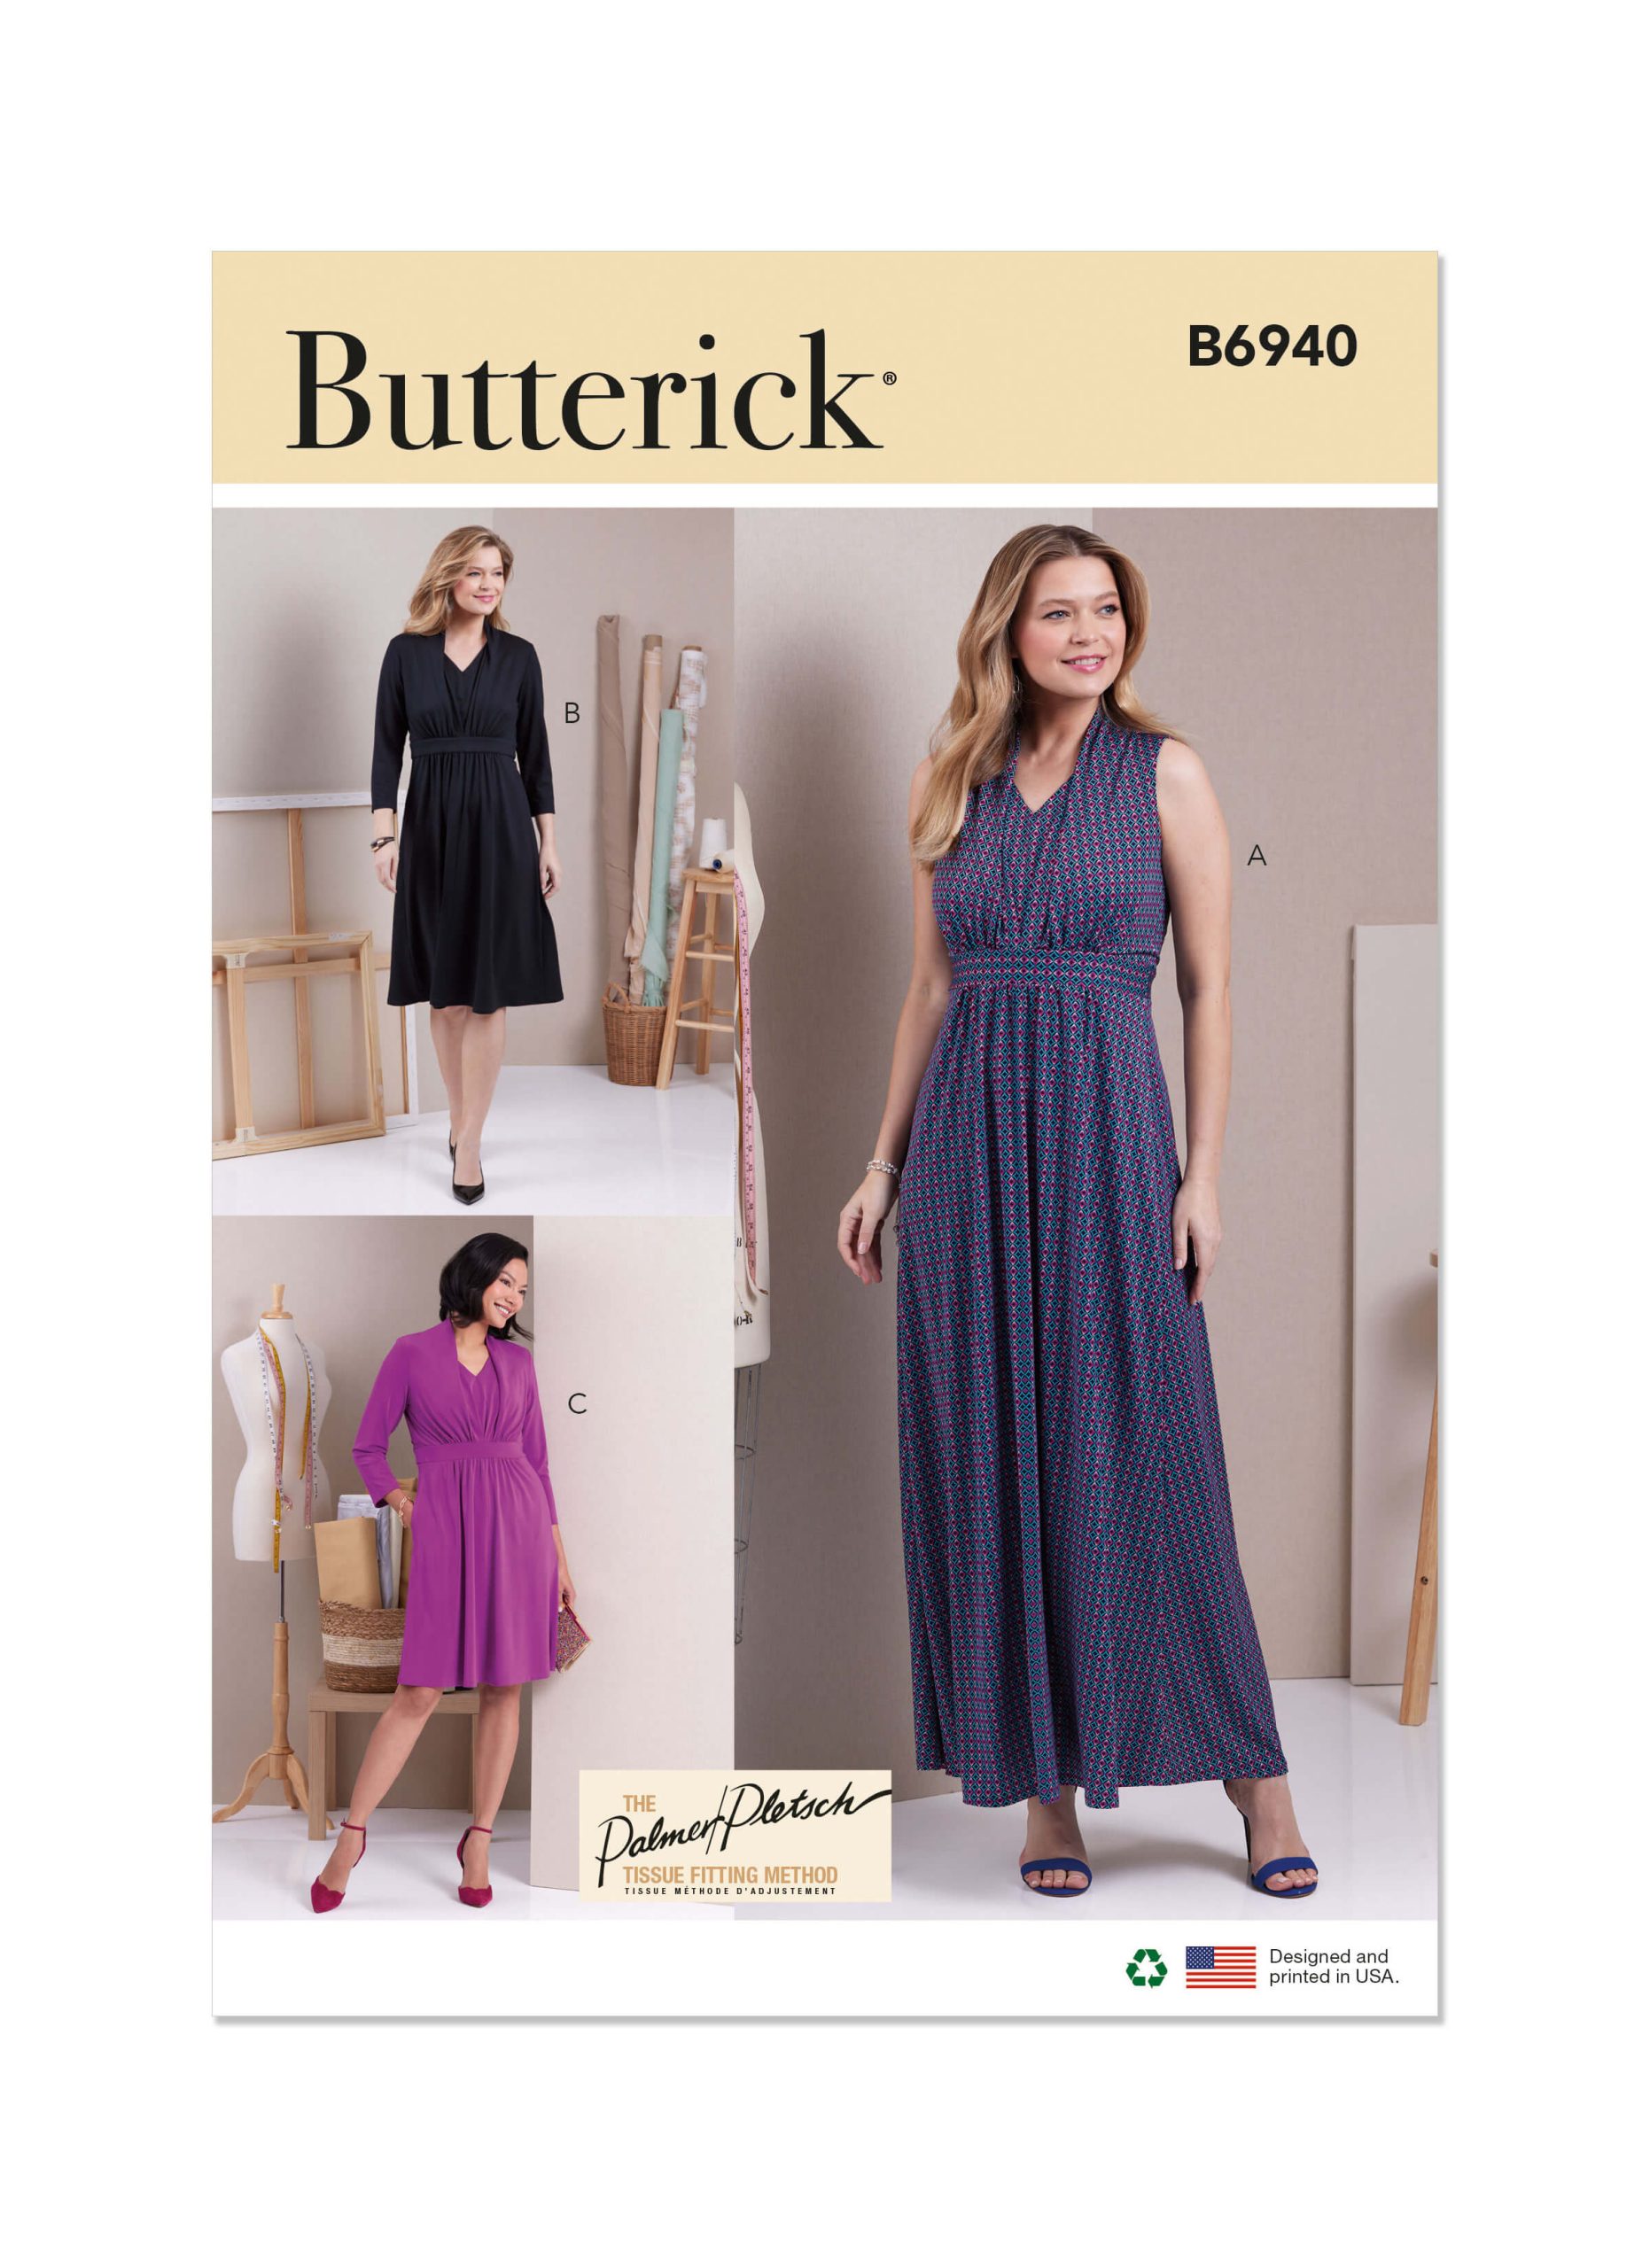 Butterick Sewing Pattern B6940 Misses' Knit Dresses by Palmer/Pletsch